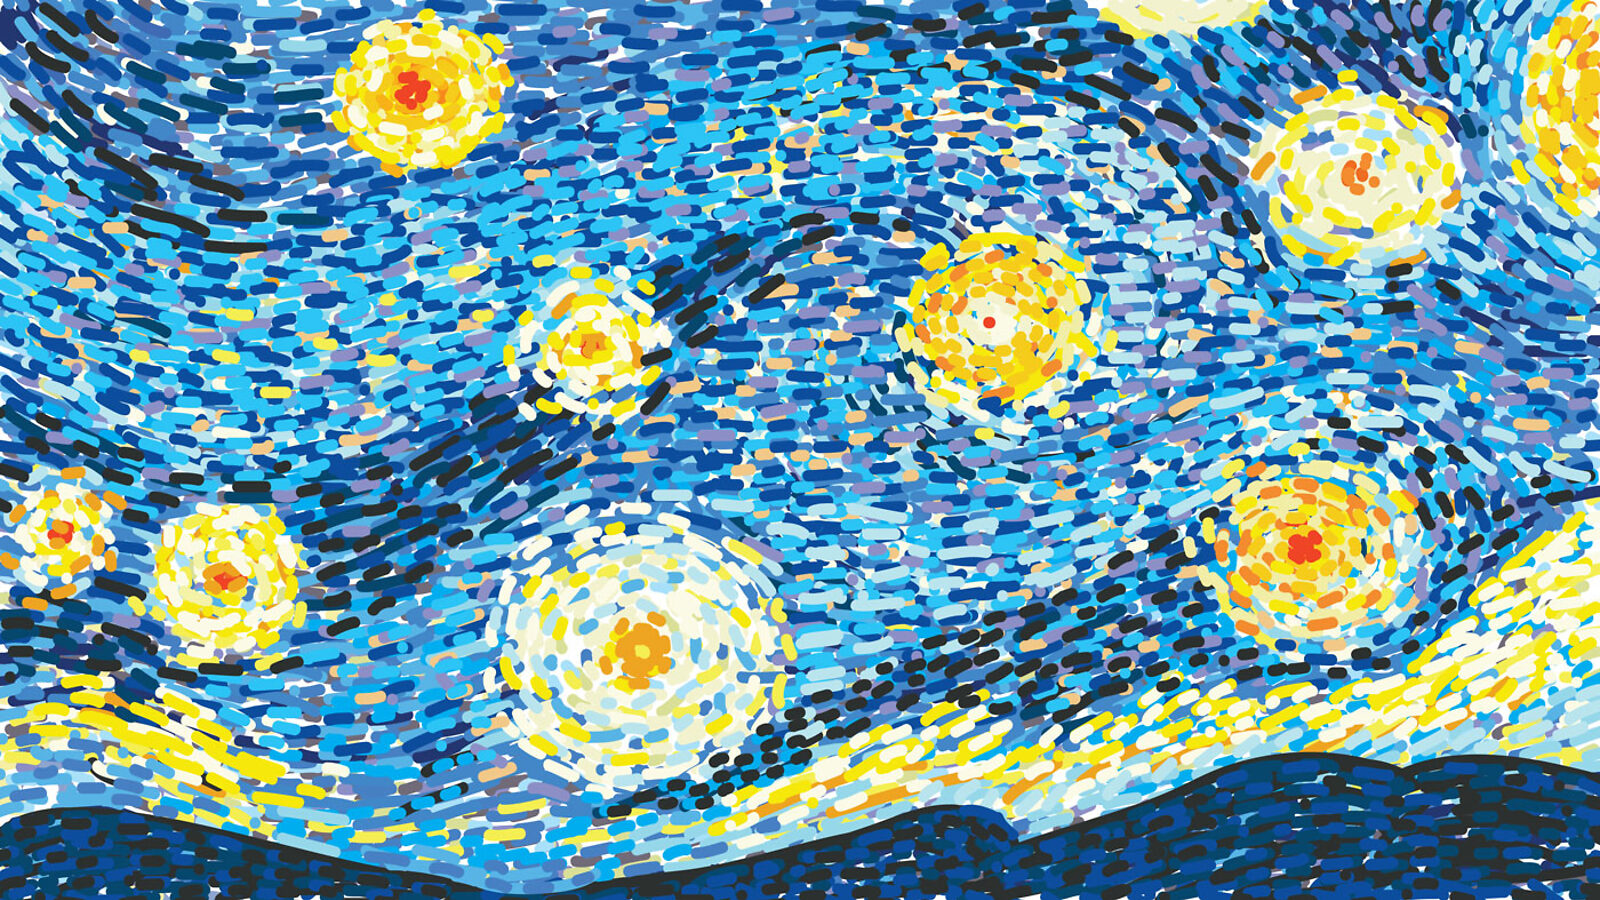 Starry night style painting 